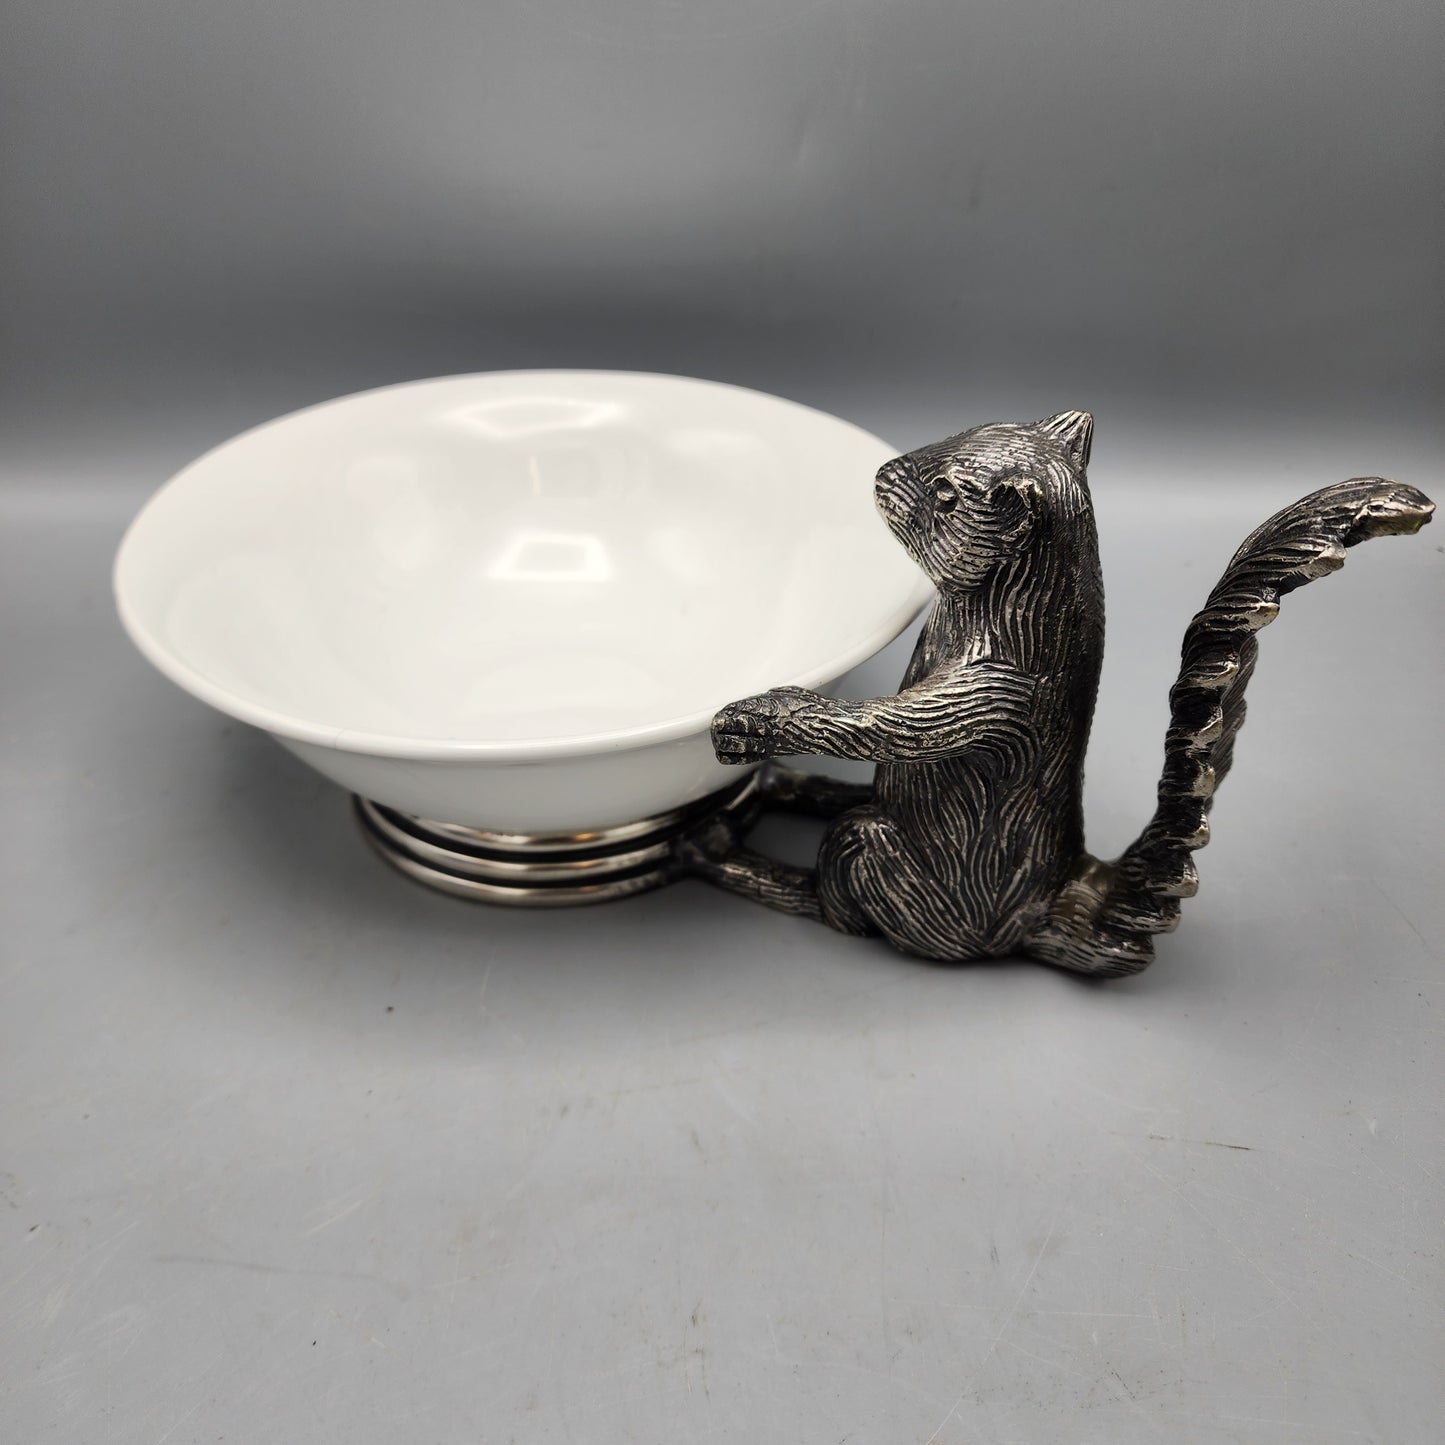 Pier One Imports Ceramic and Metal Serving Bowl